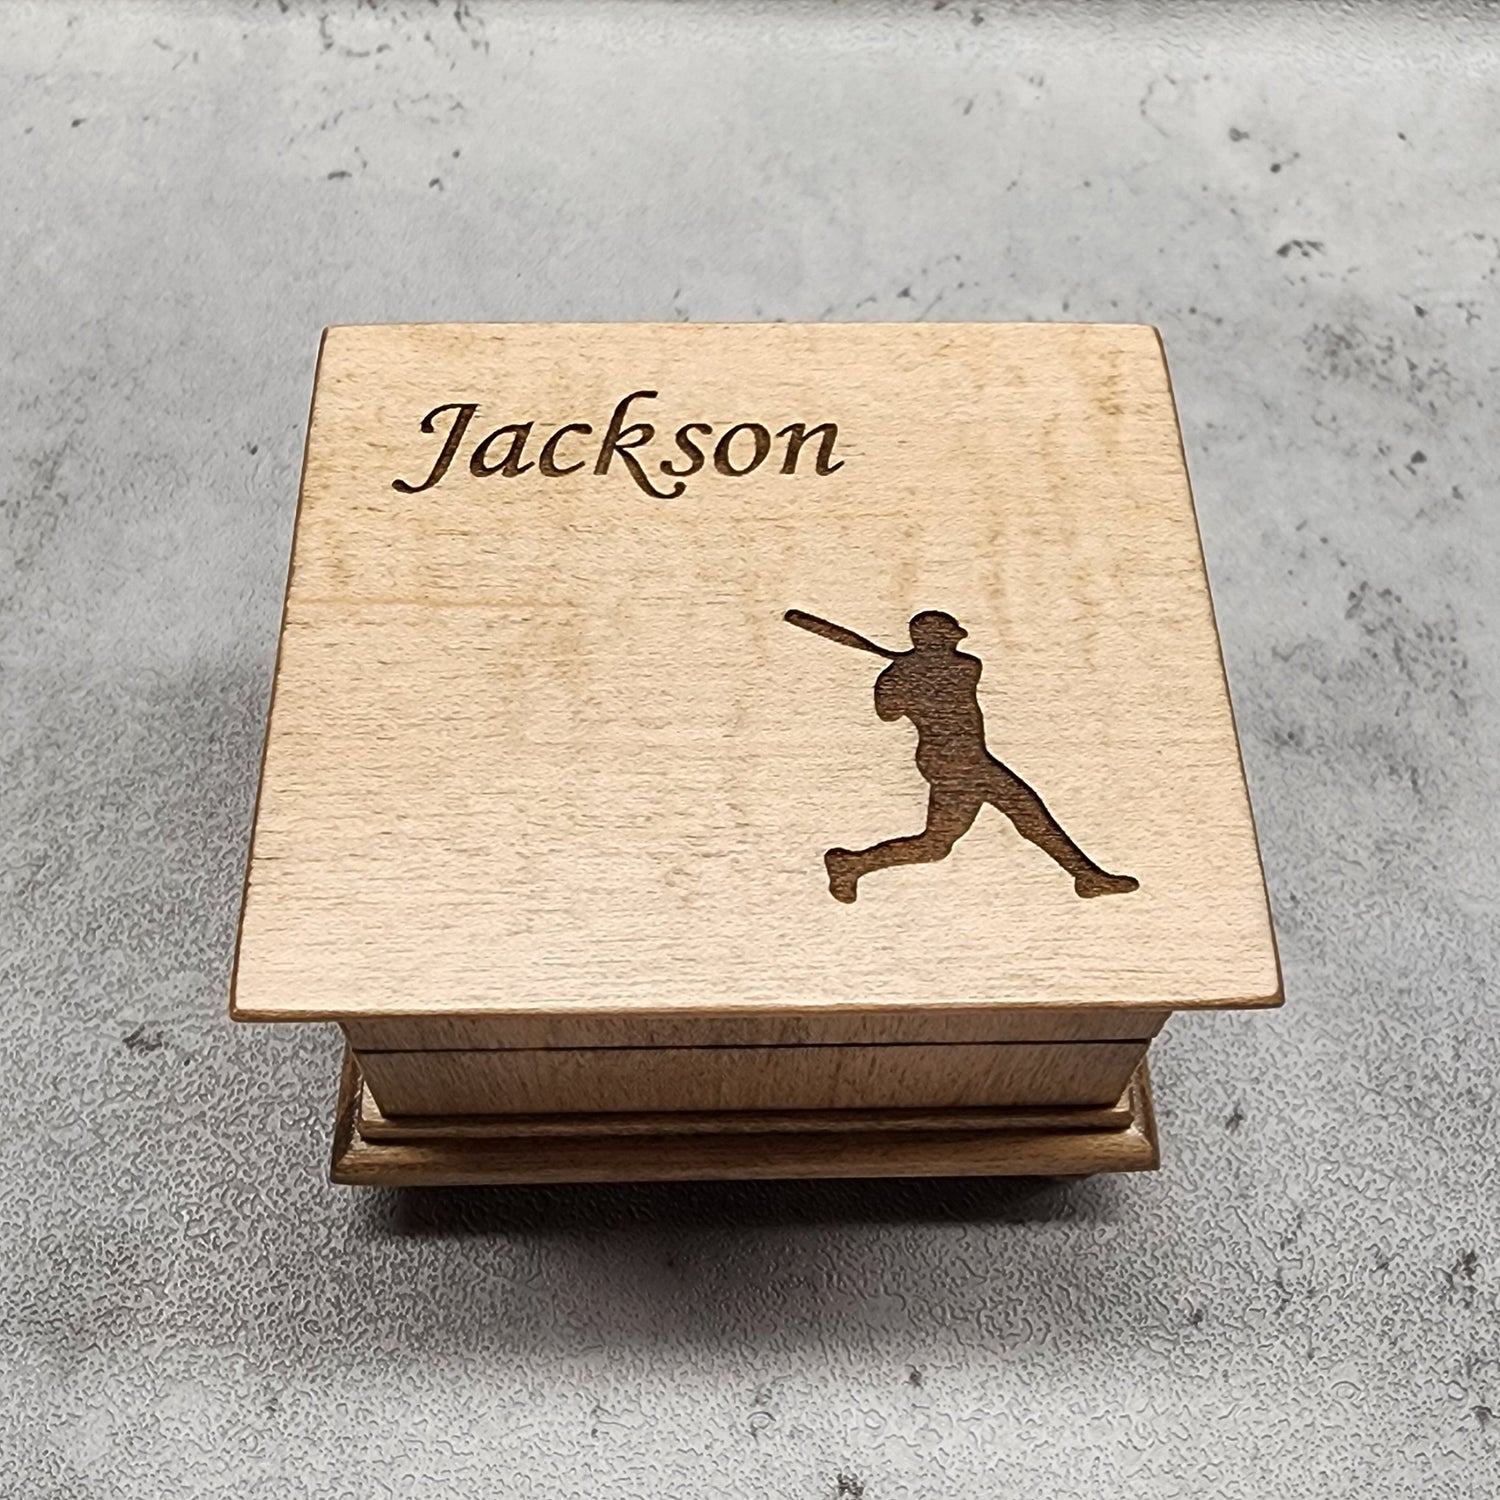 Wooden music box with a name and baseball player silhouette engraved on top, choose song like Take me out to the ballgame and color